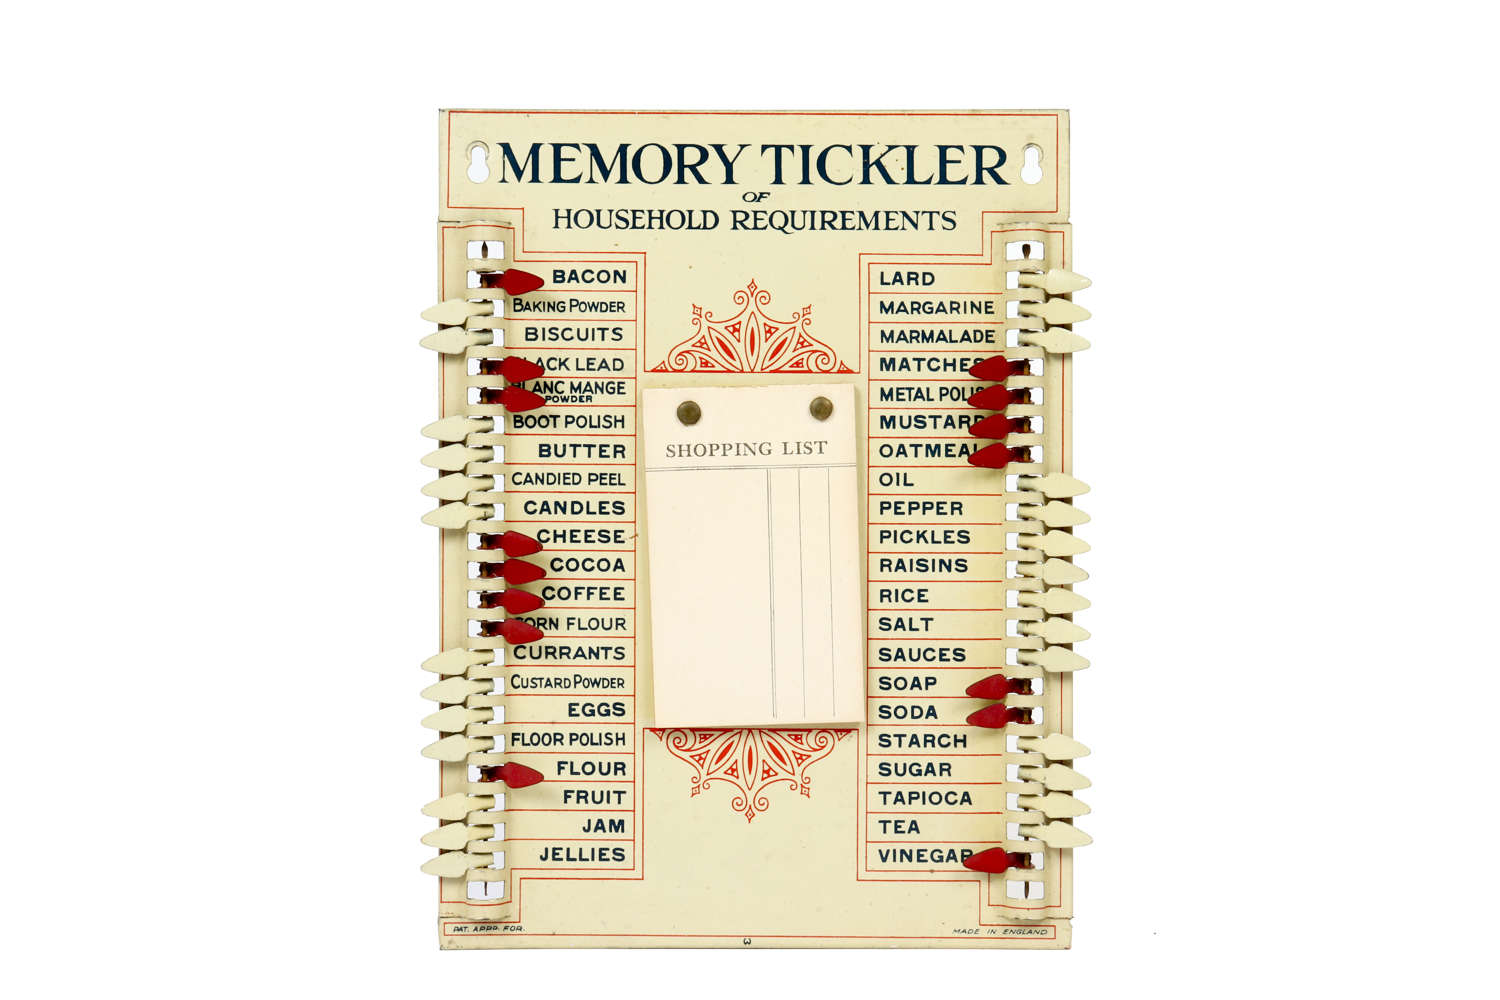 Memory Tickler of Household Requirements